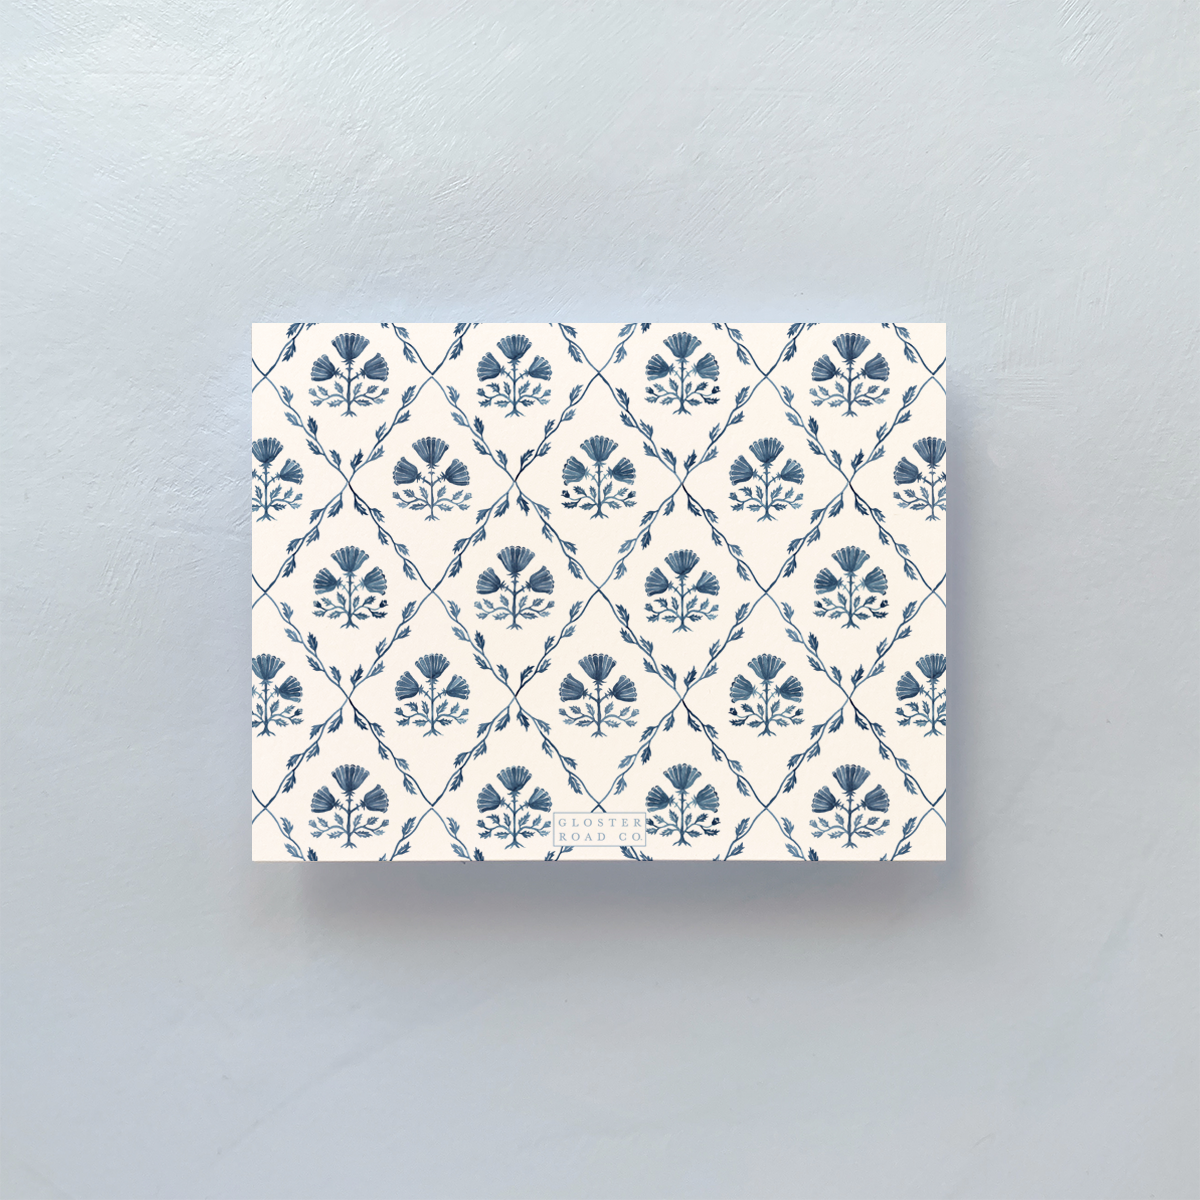 Notecard with blue and white pattern and envelope